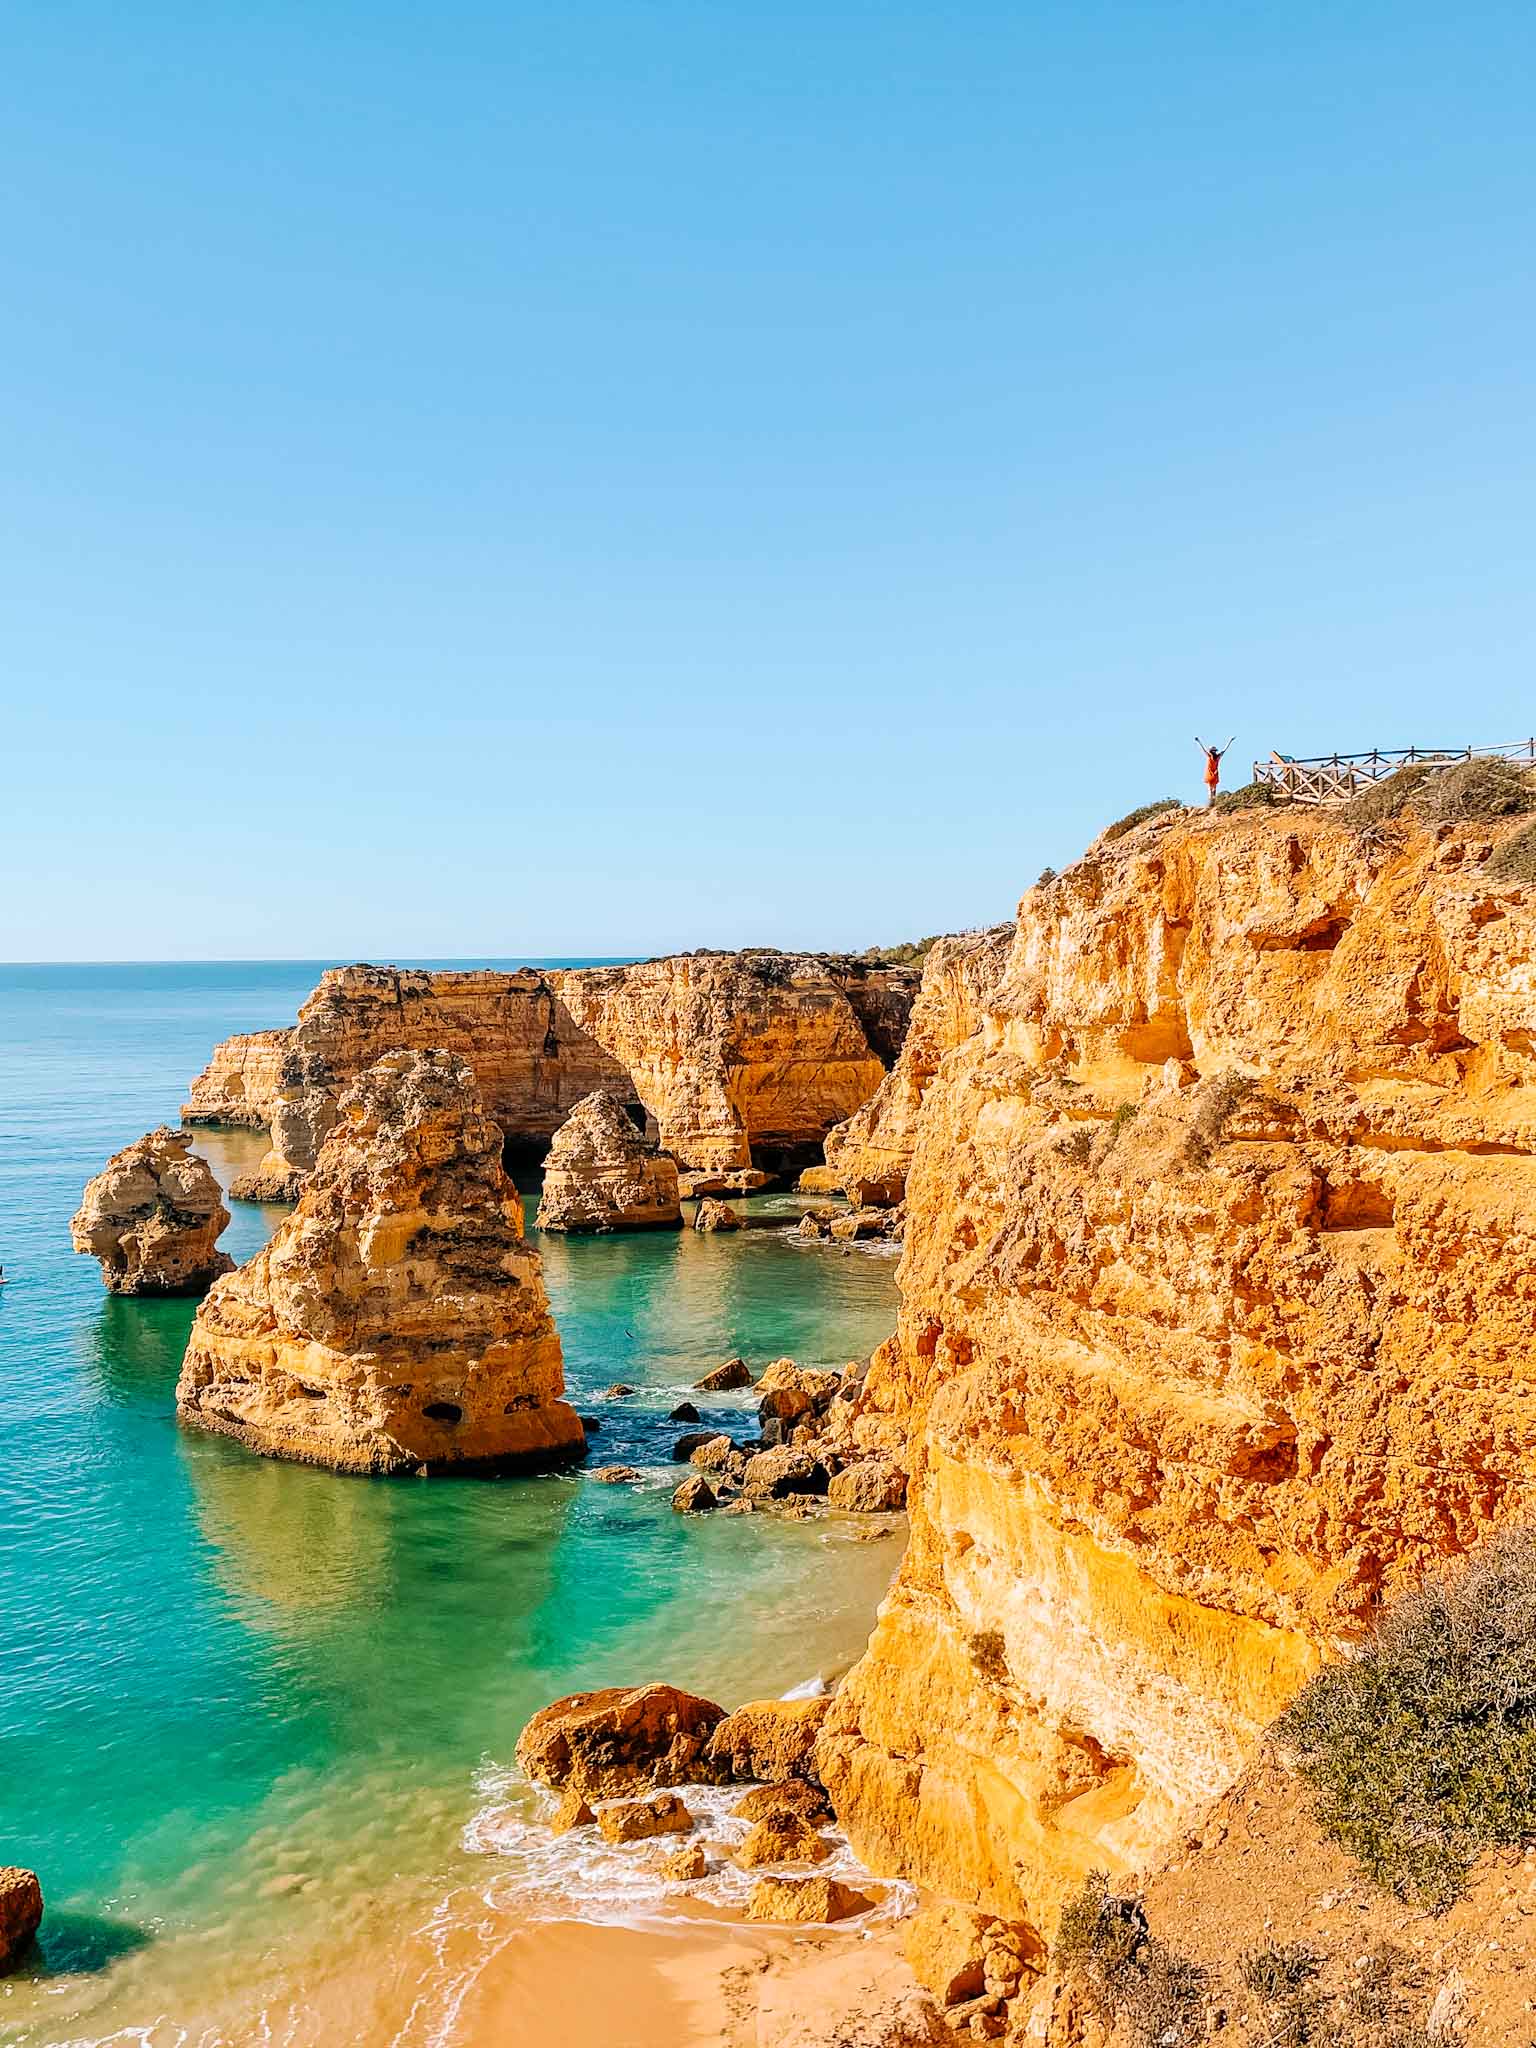 How to find the heart-shaped rock in Algarve